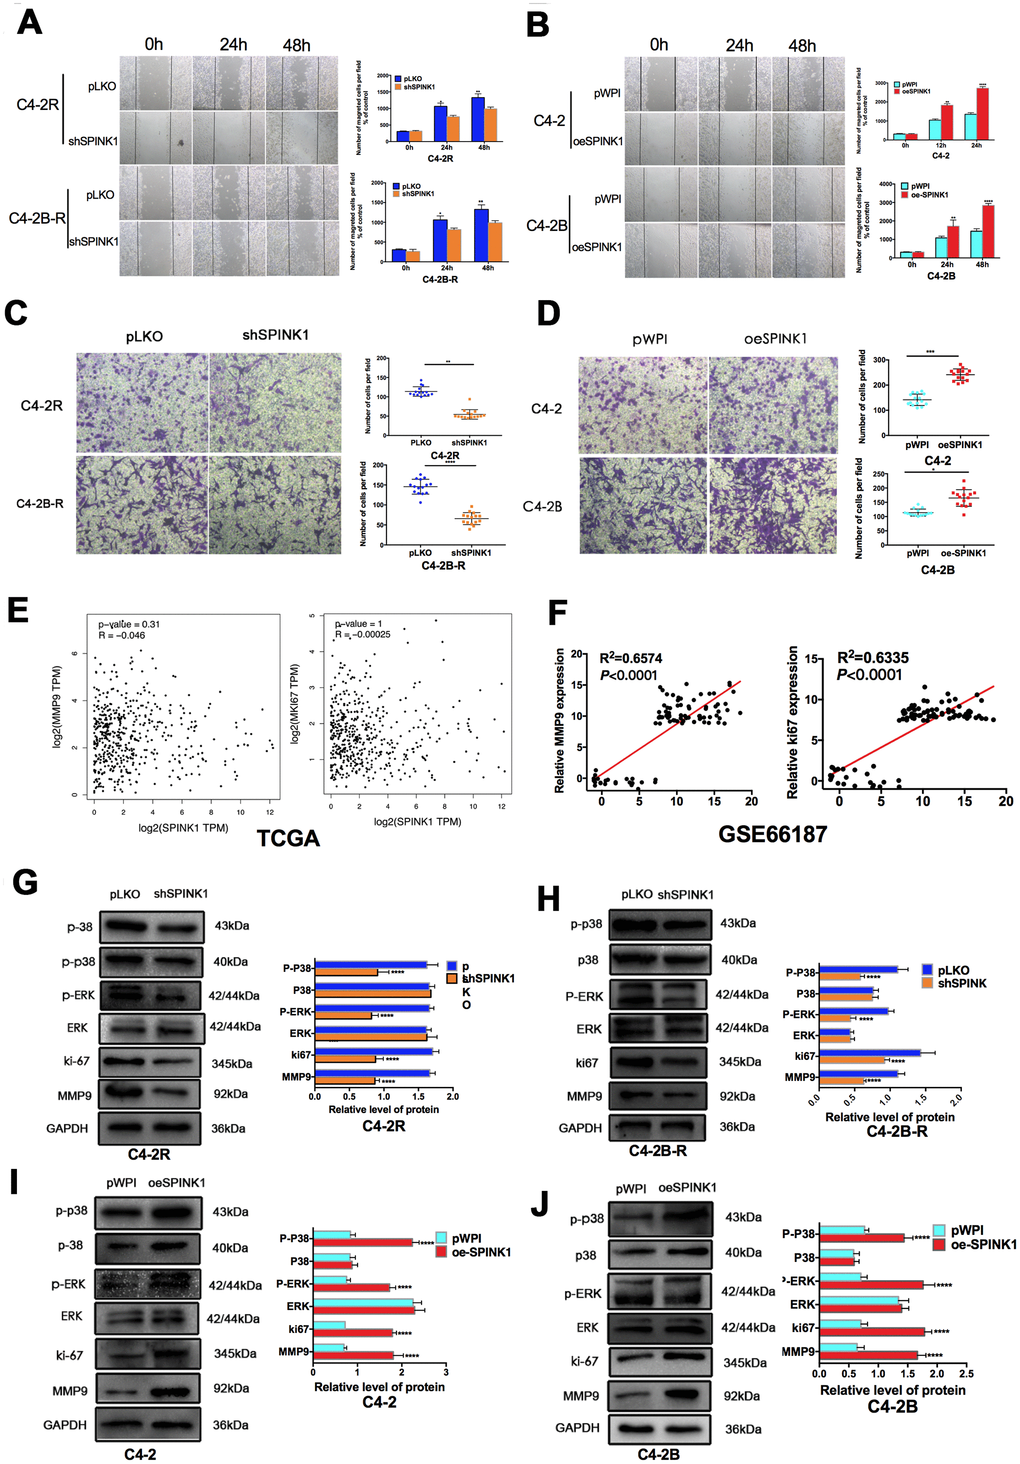 SPINK1 enhances migration and invasion of Enz-resistant cells via MAPK/MMP9 signaling. (A, B) Migration rates of shSPINK1 C4-2R and C4-2B-R cells, and oeSPINK1 C4-2 andC4-2B cells in the wound healing assay. (C, D) Invasive capacity of shSPINK1 C4-2R and C4-2B-R cells, and oeSPINK1 C4-2 and C4-2B cells in the transwell assay. (E, F) Correlation of SPINK1 expression with MMP9 and Ki67 levels in PCa tissues of TCGA and GSE66187 datasets. (G–J) Relative p-ERK, p-p38, Ki67 and MMP9 protein levels in shSPINK1 C4-2R and C4-2B-R cells, and oeSPINK1 C4-2 and C4-2B cells. Each bar represents the mean ± SEM, *P 